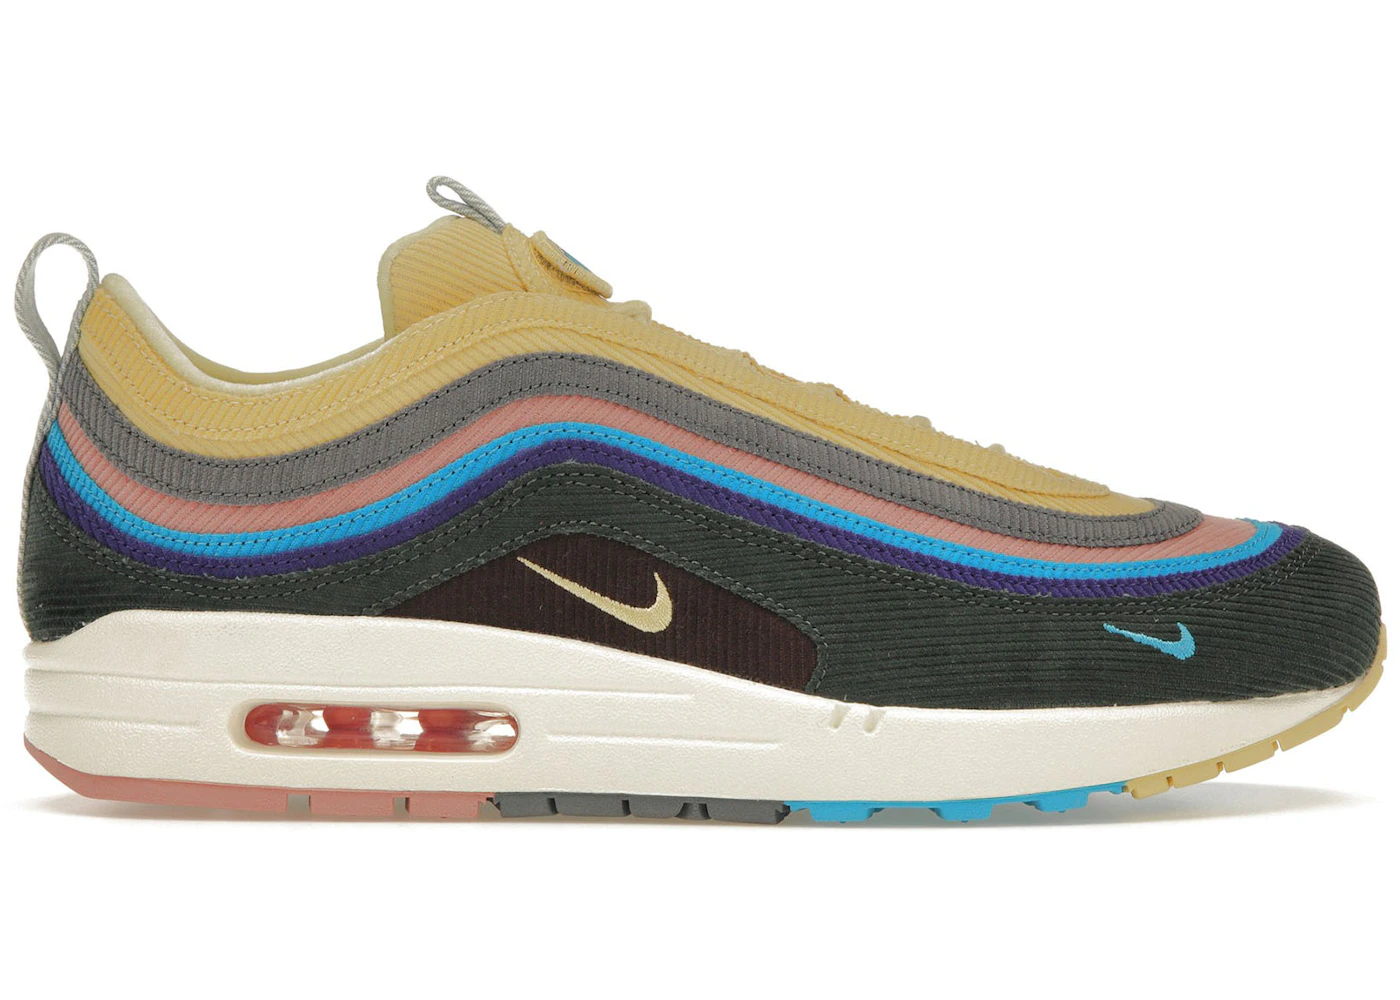 Nike Air Max 1/97 Wotherspoon Lace Only) Men's - AJ4219-400 - US